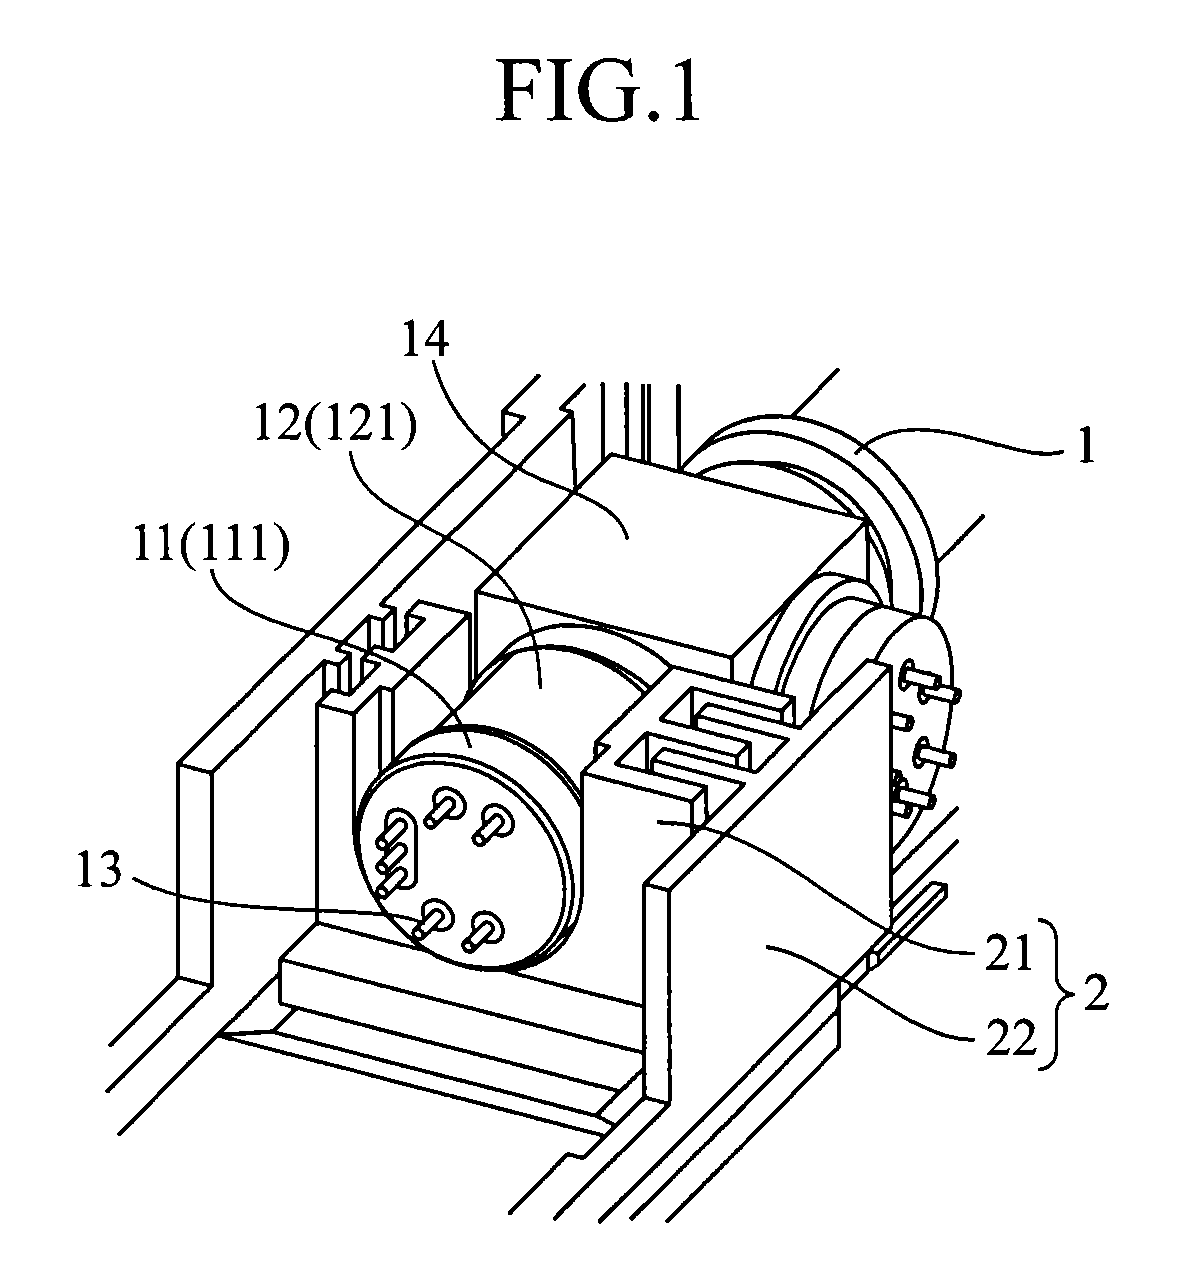 Heat dissipation structure and optical transceiver